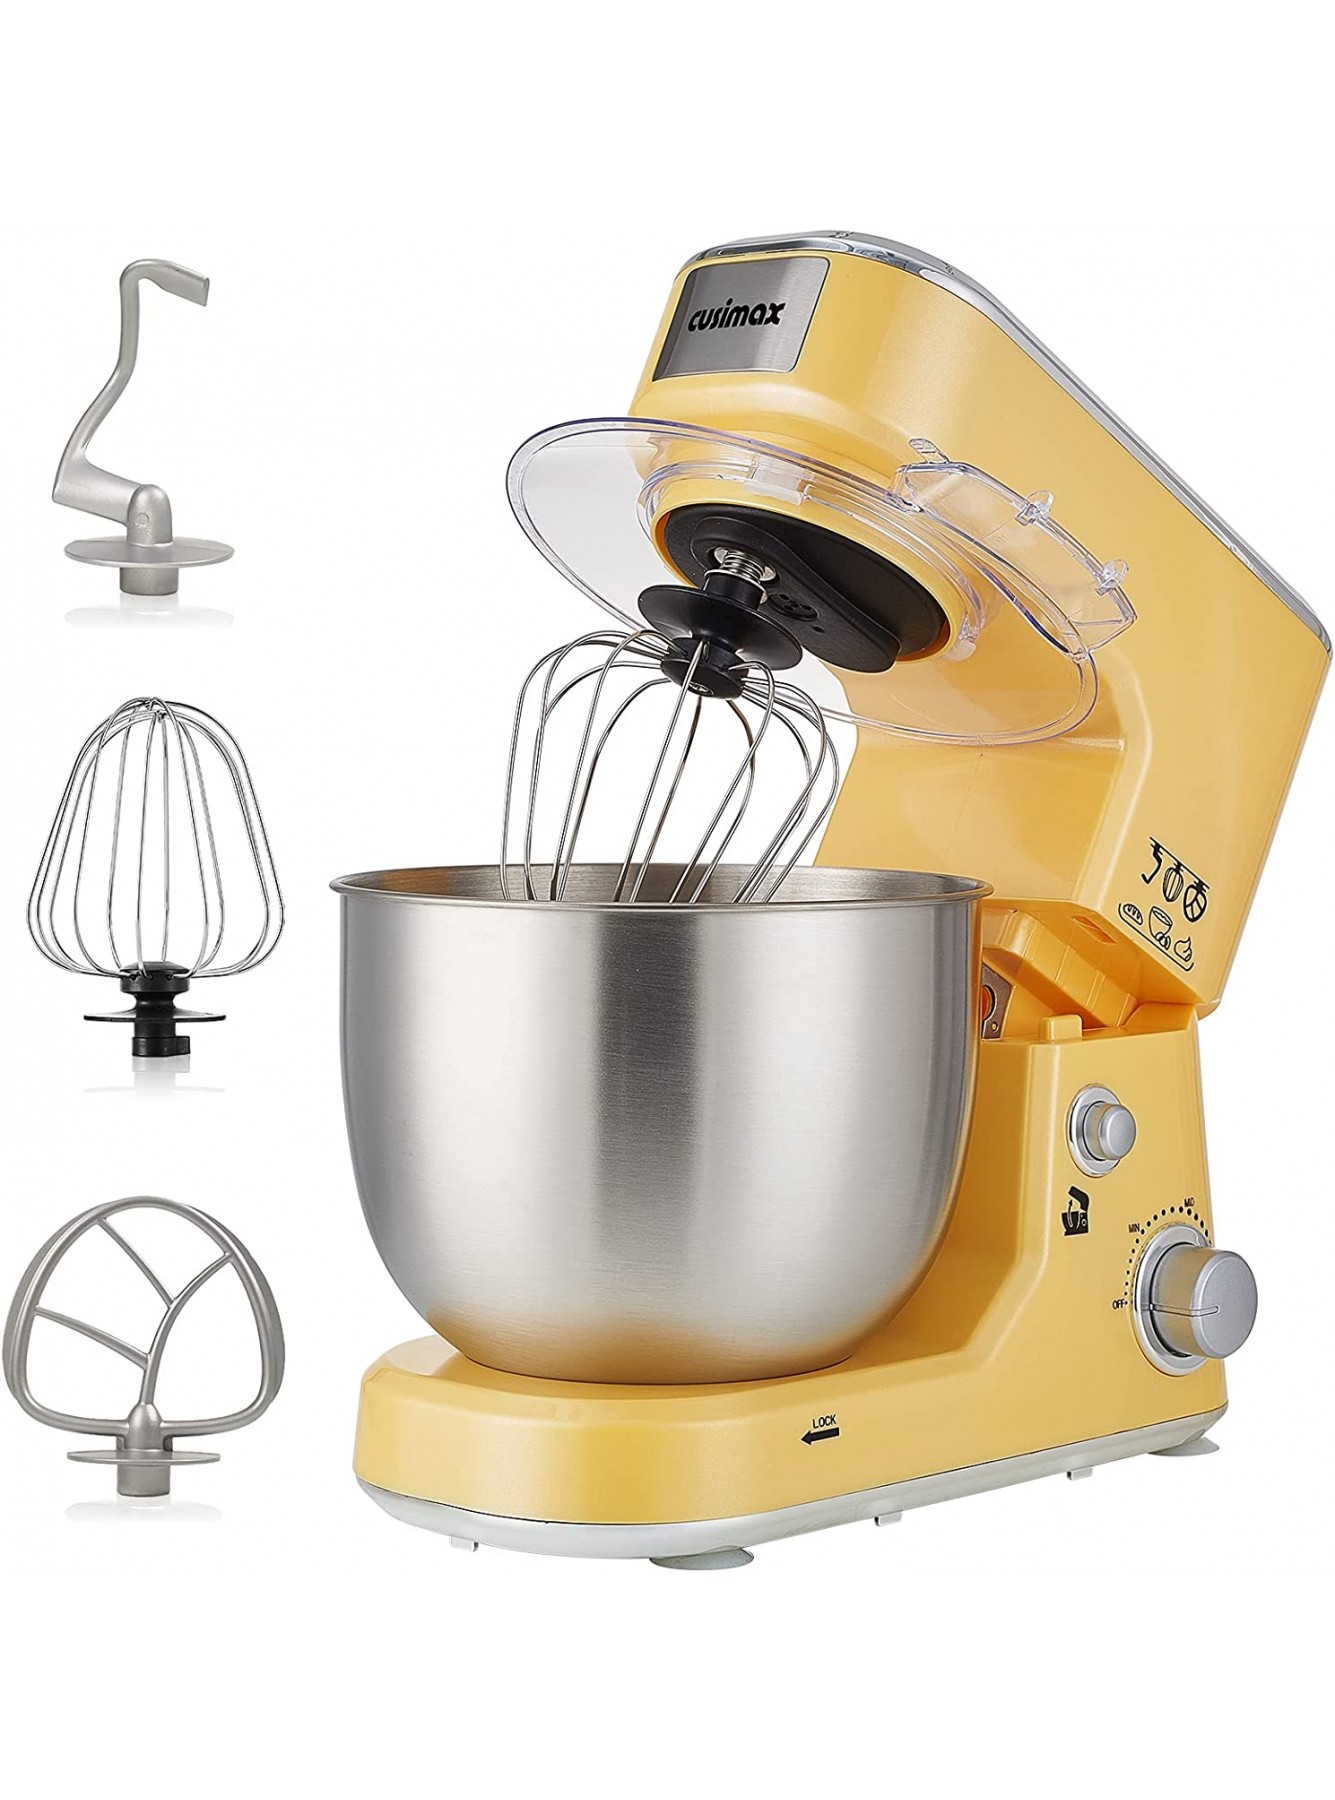 Stand Mixer CUSIMAX Dough Mixer Tilt-Head Electric Mixer with 5-Quart Stainless Steel Bowl Dough Hook Mixing Beater and Whisk Splash Guard B08TN4YX6M